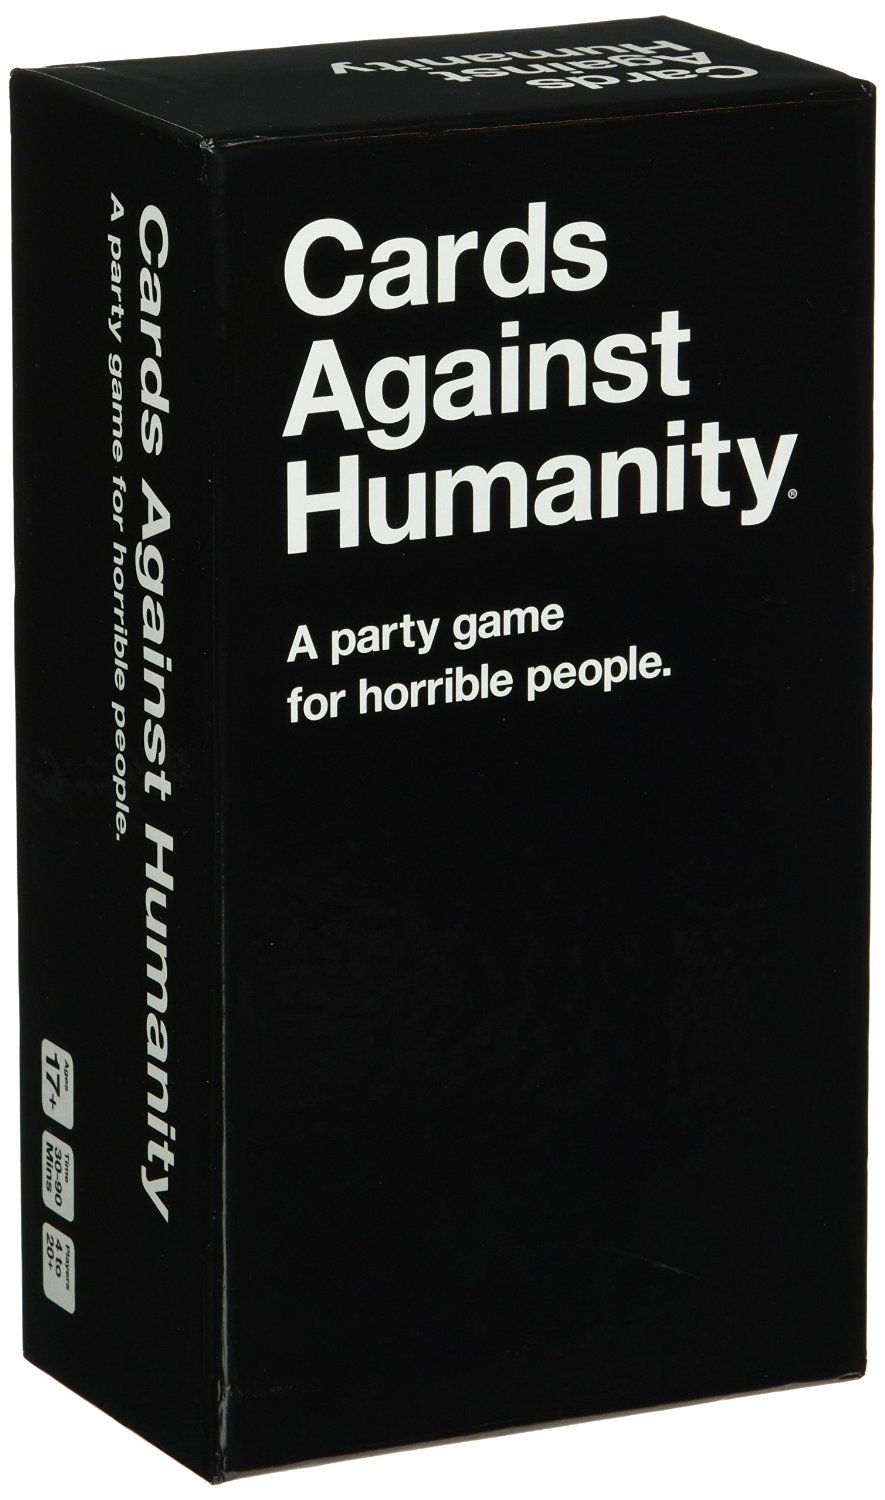 Best Stocking Stuffers 2016: Cards Against Humanity 2017